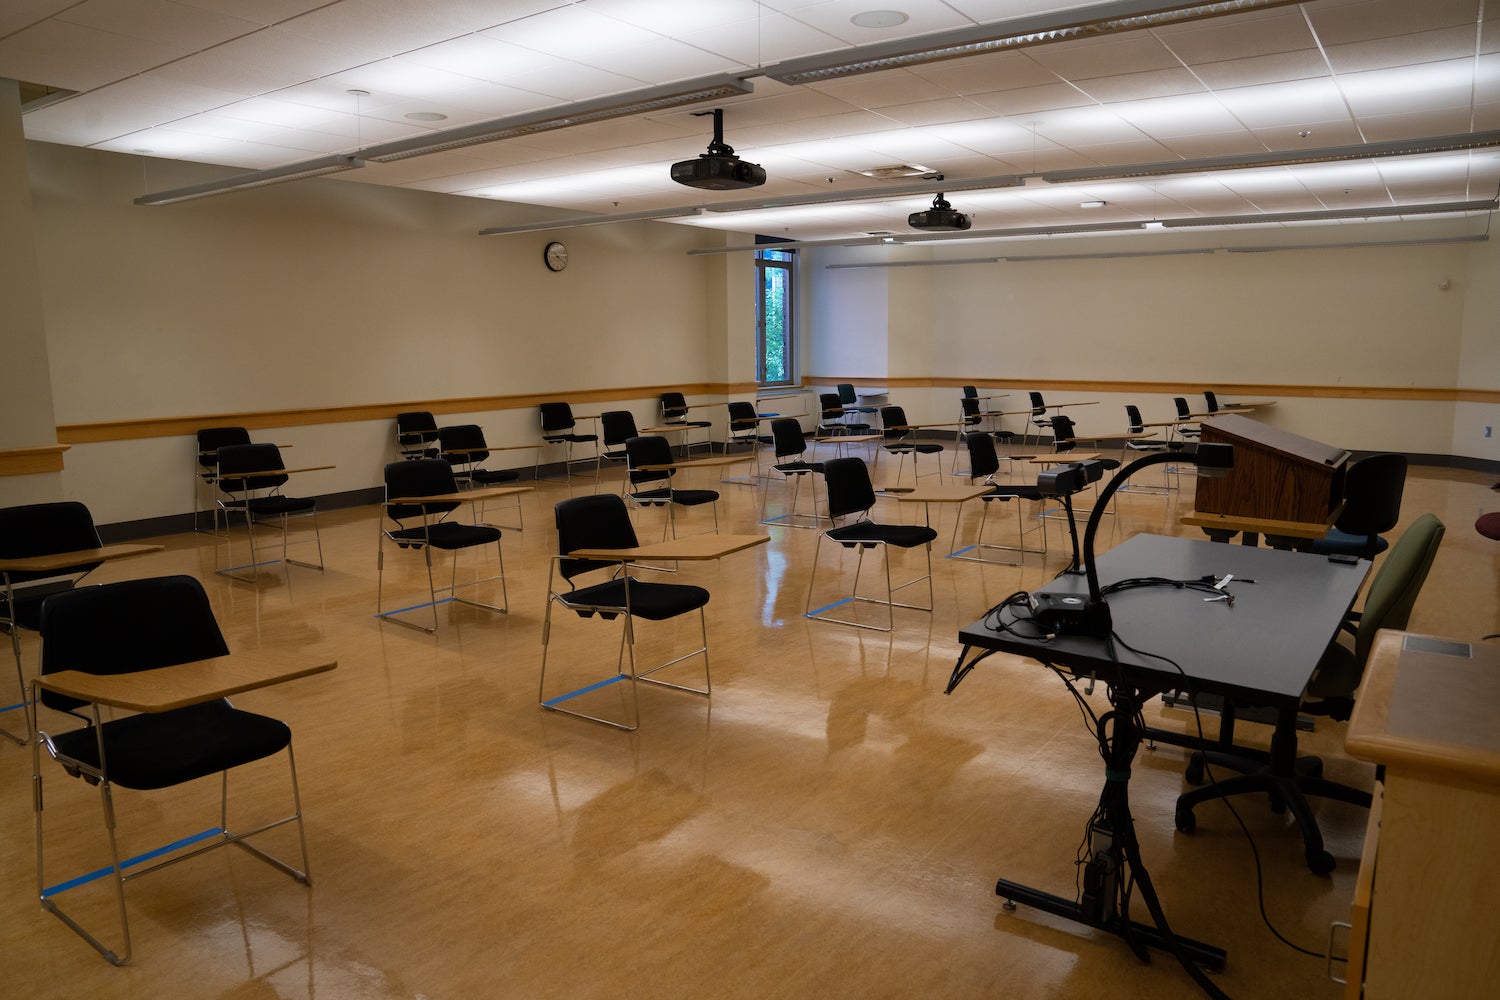 A college classroom with spaced out, empty desks.